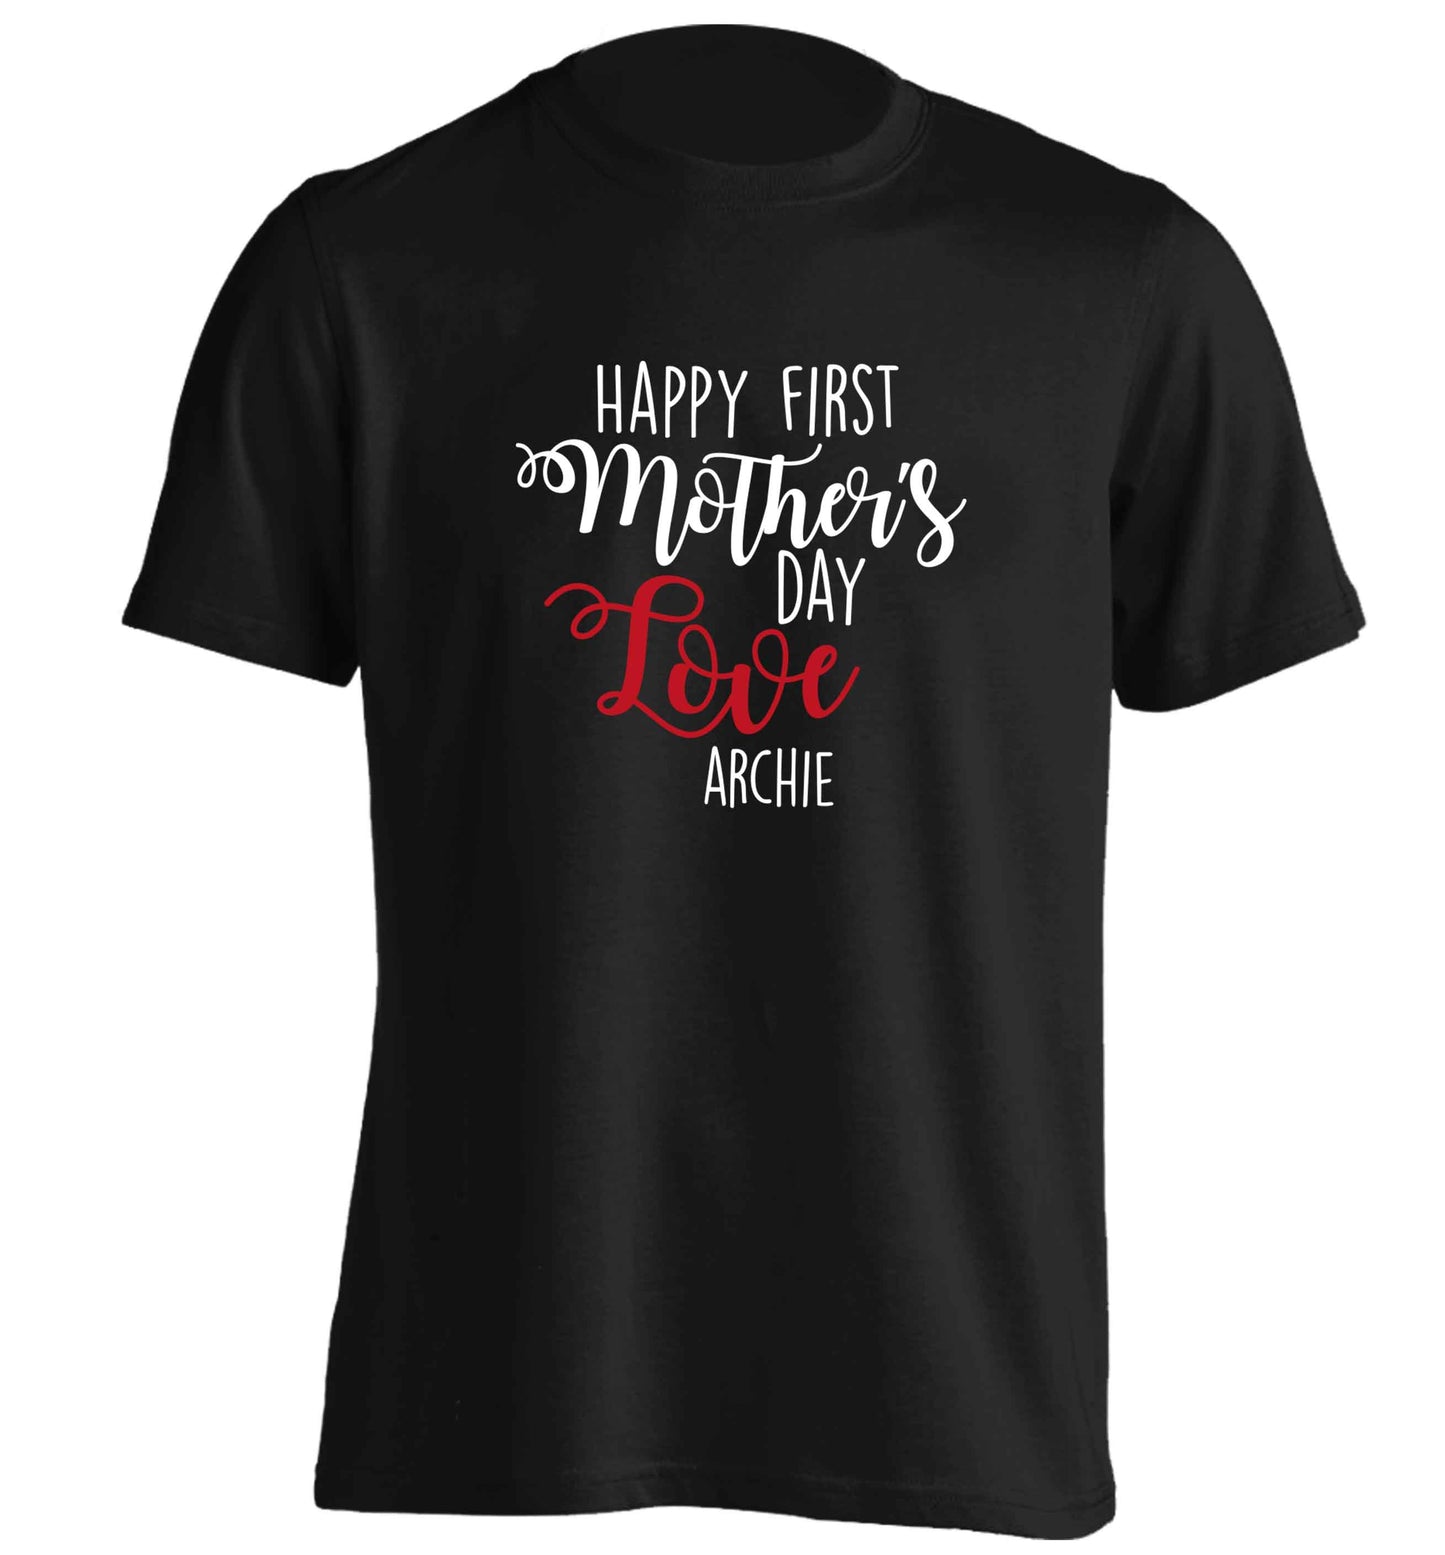 Personalised happy first mother's day love adults unisex black Tshirt 2XL